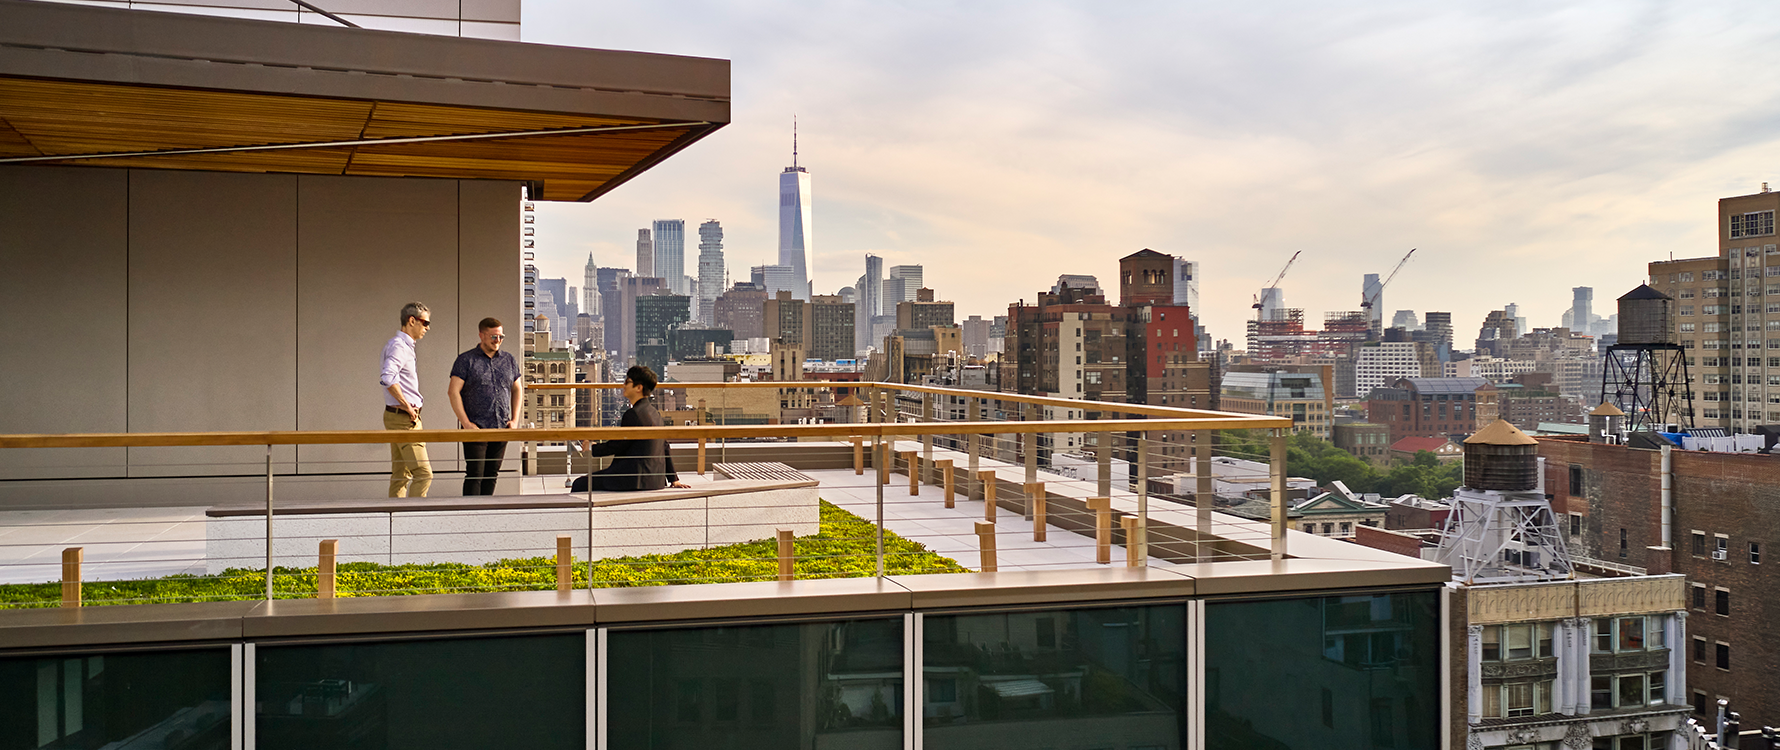 Rooftop terrace at 799 Broadway overlooking Greenwich Village